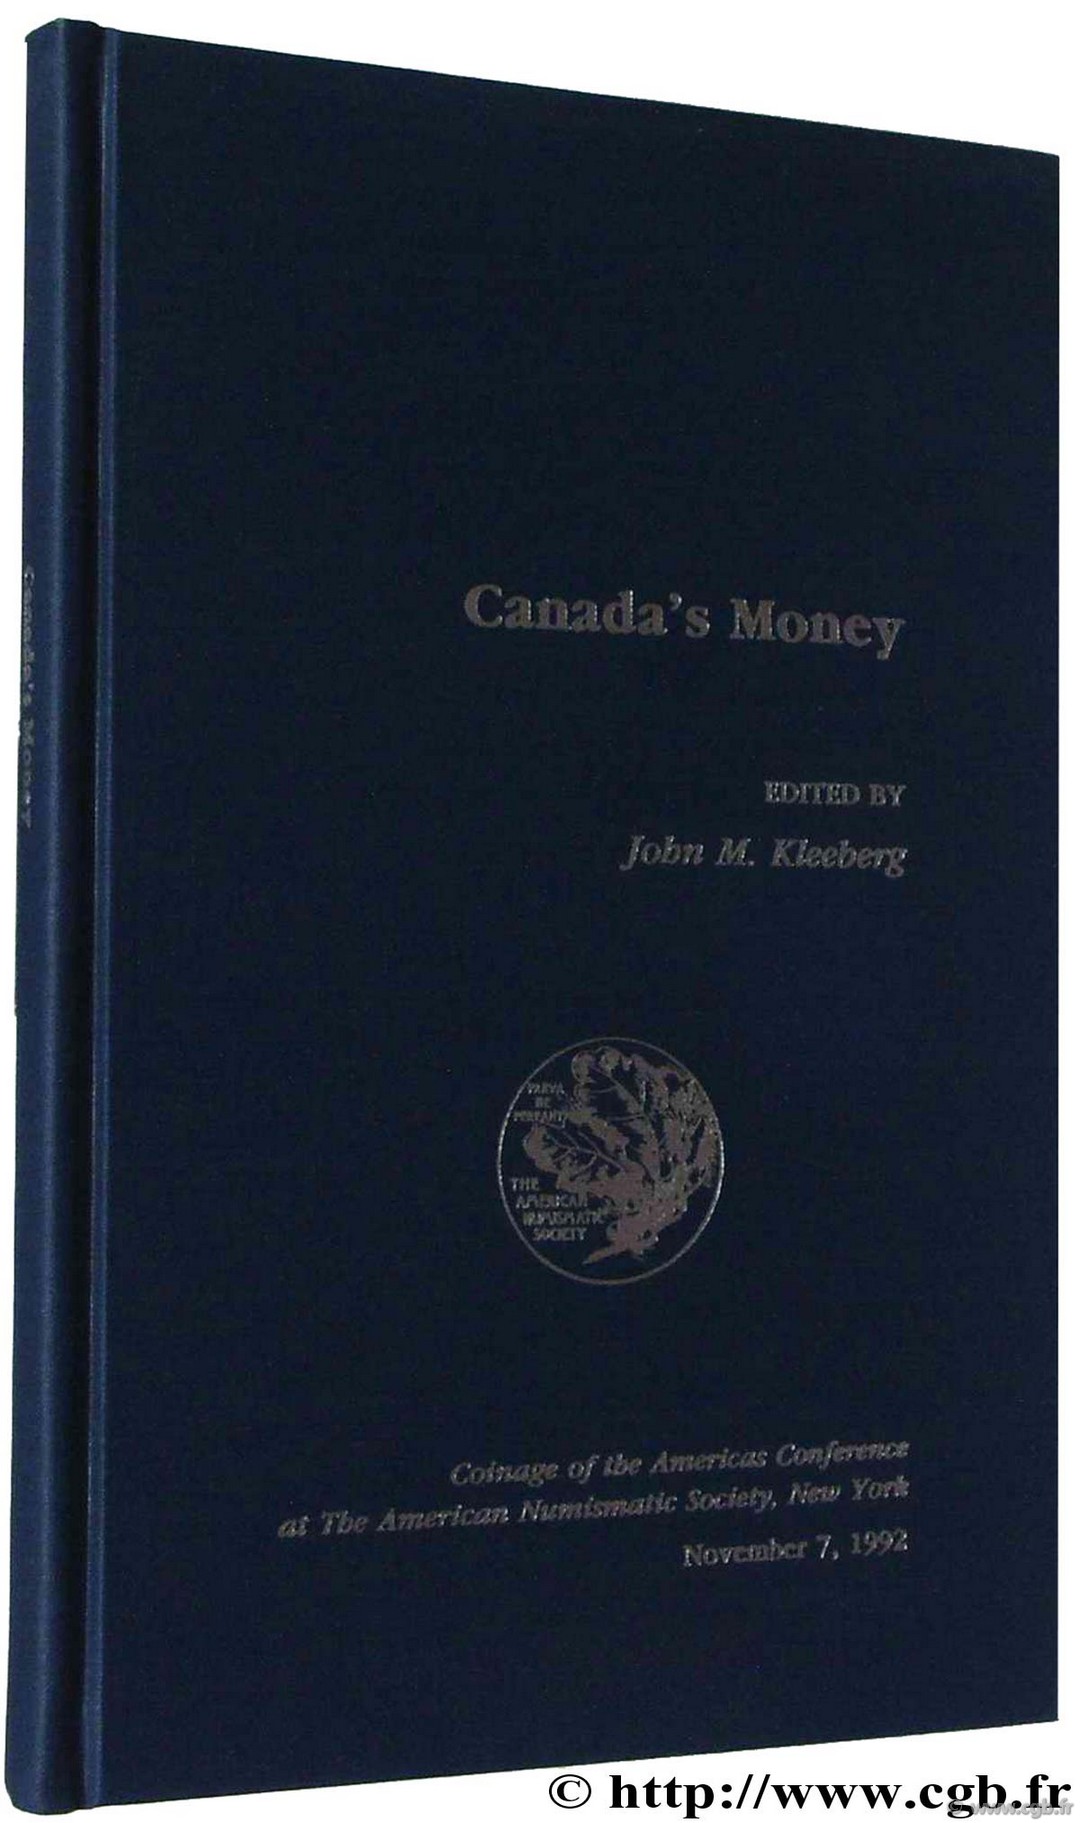 Canada s Money, Coinage of the Americas Conférence at the American Numismatic Society, New York November 7, 1992 